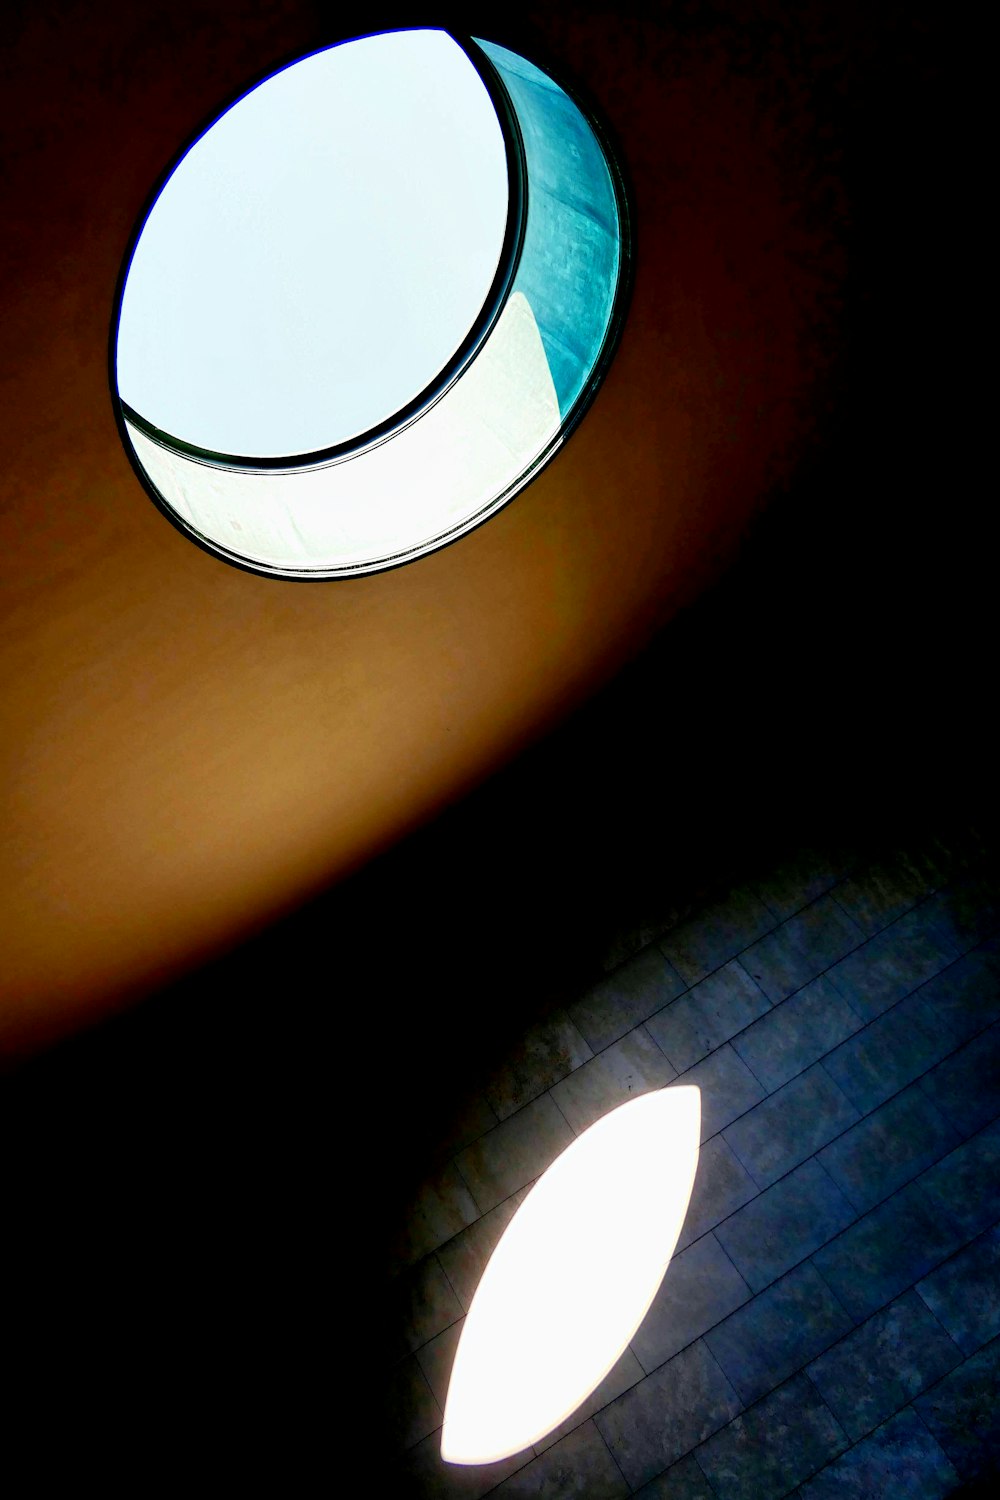 a round window in the ceiling of a building